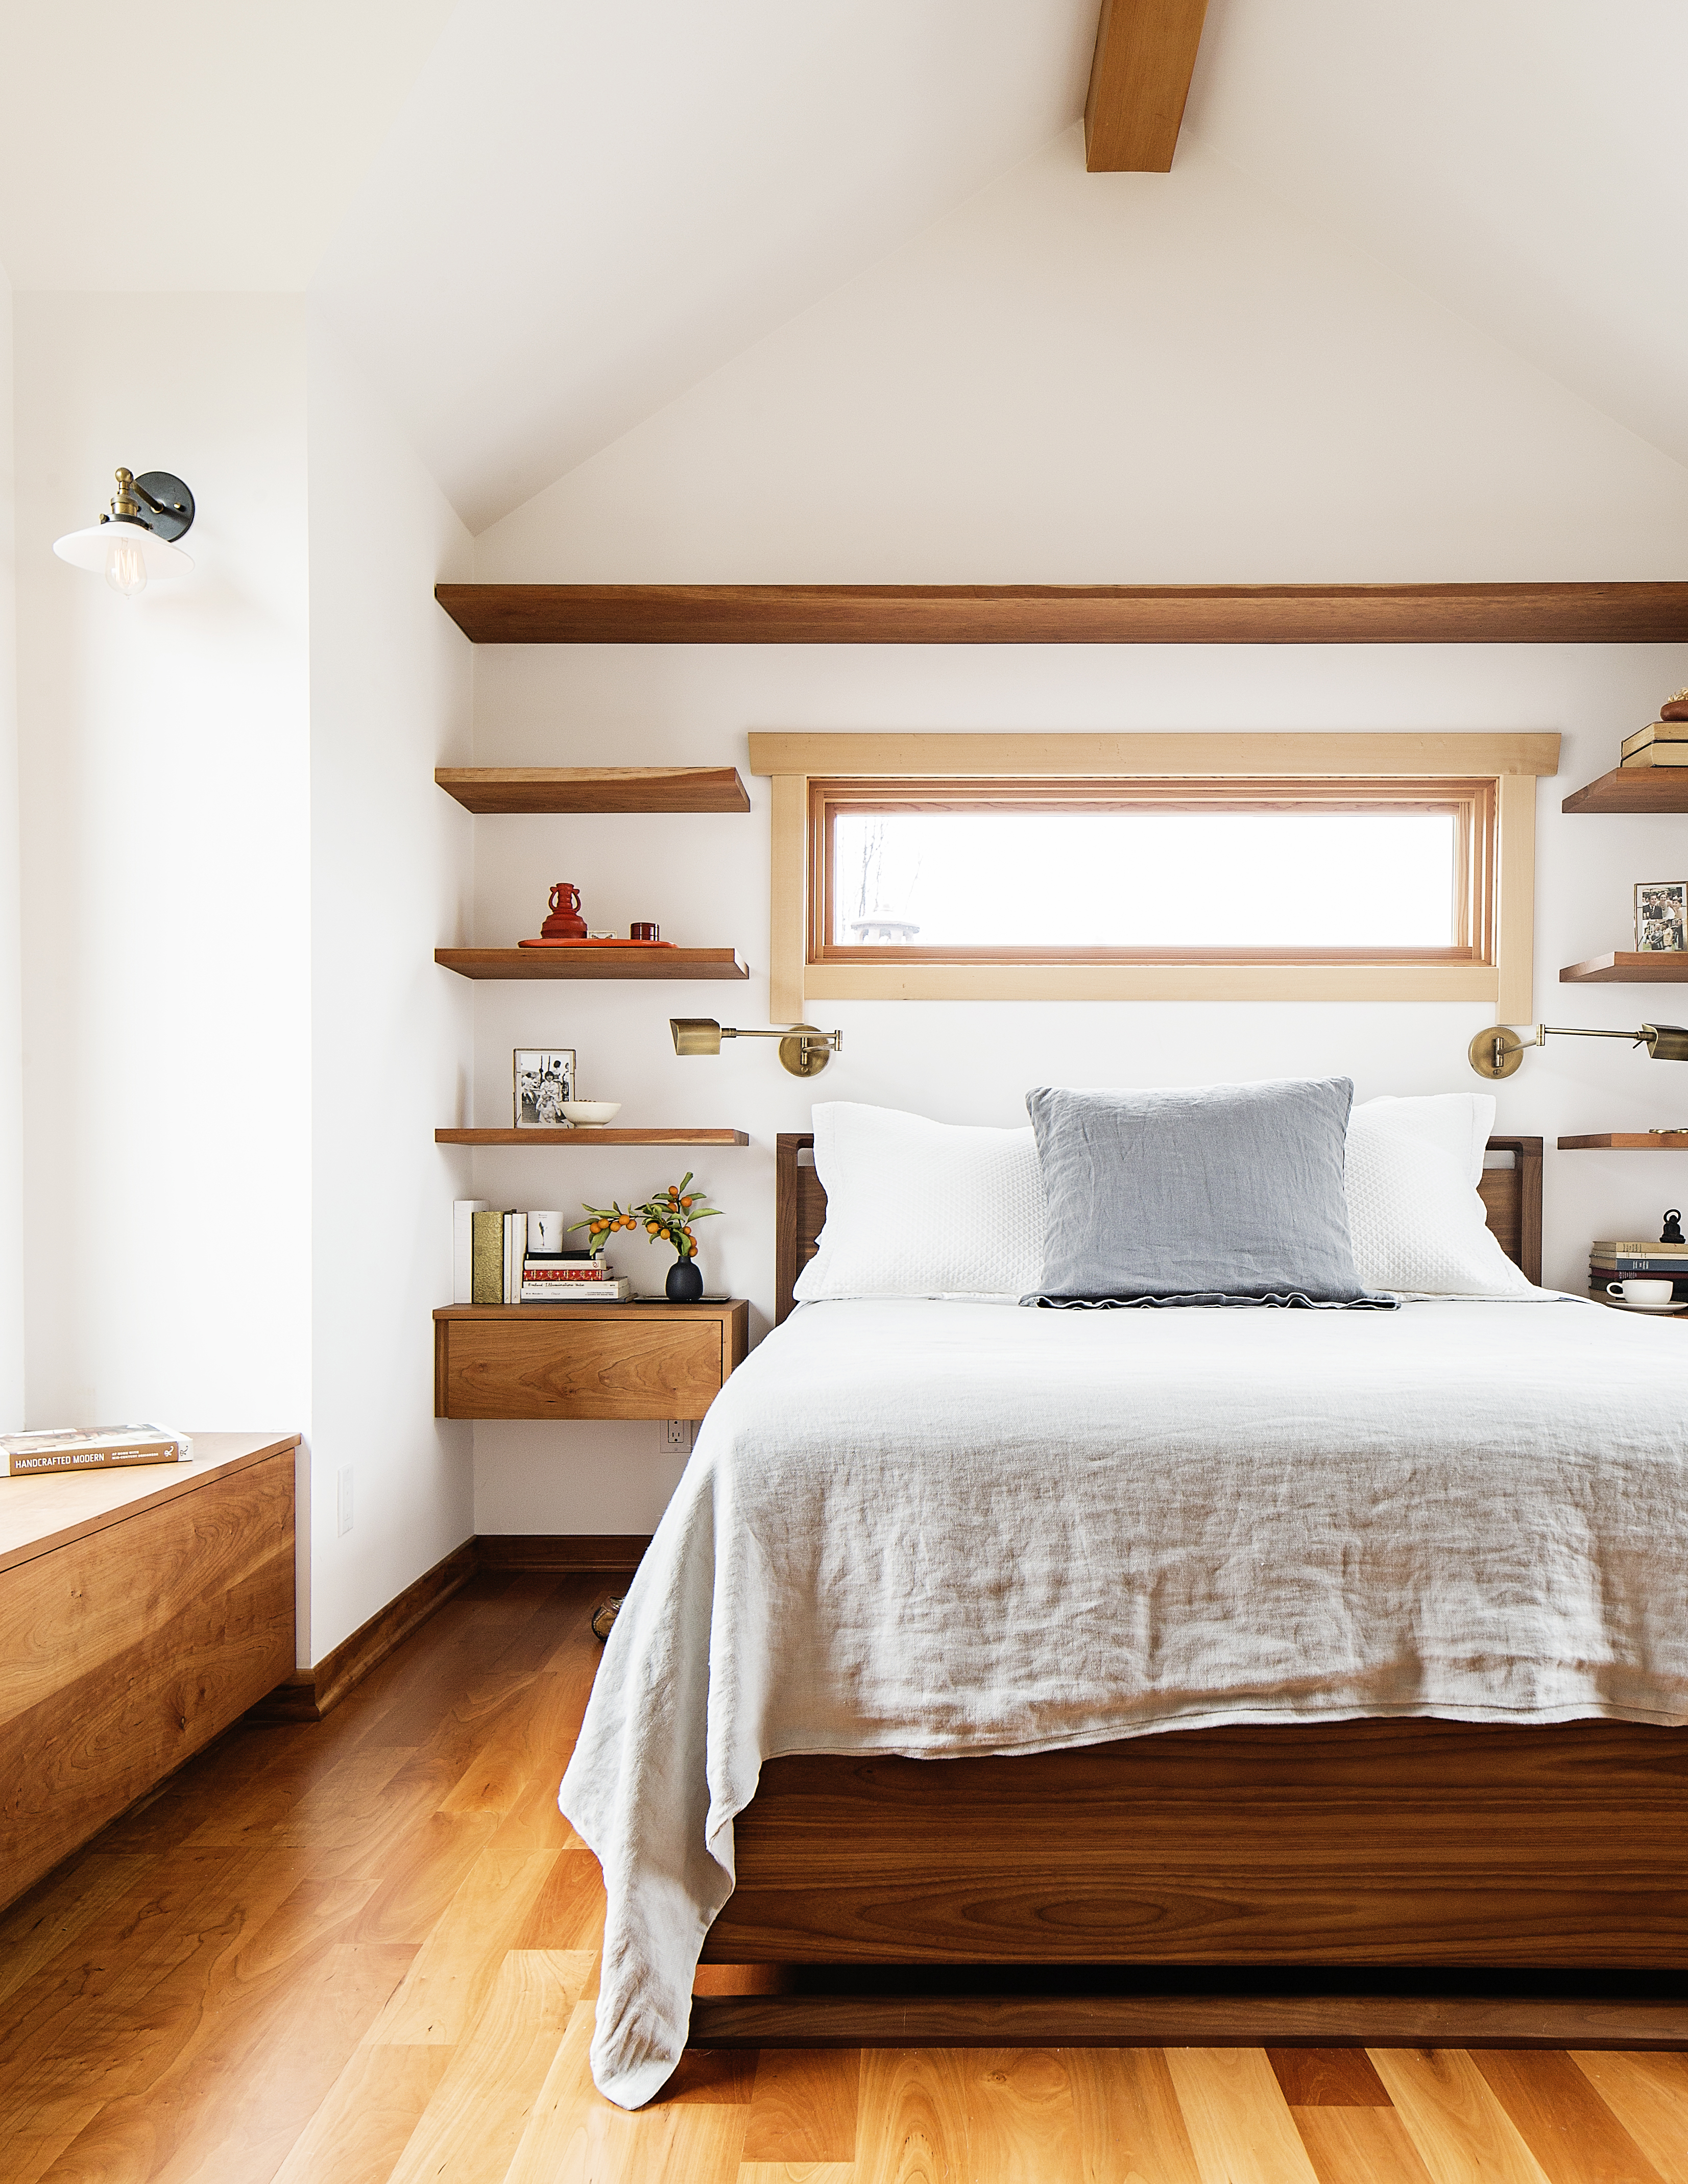 5 Ways to Maximize Bedroom Space